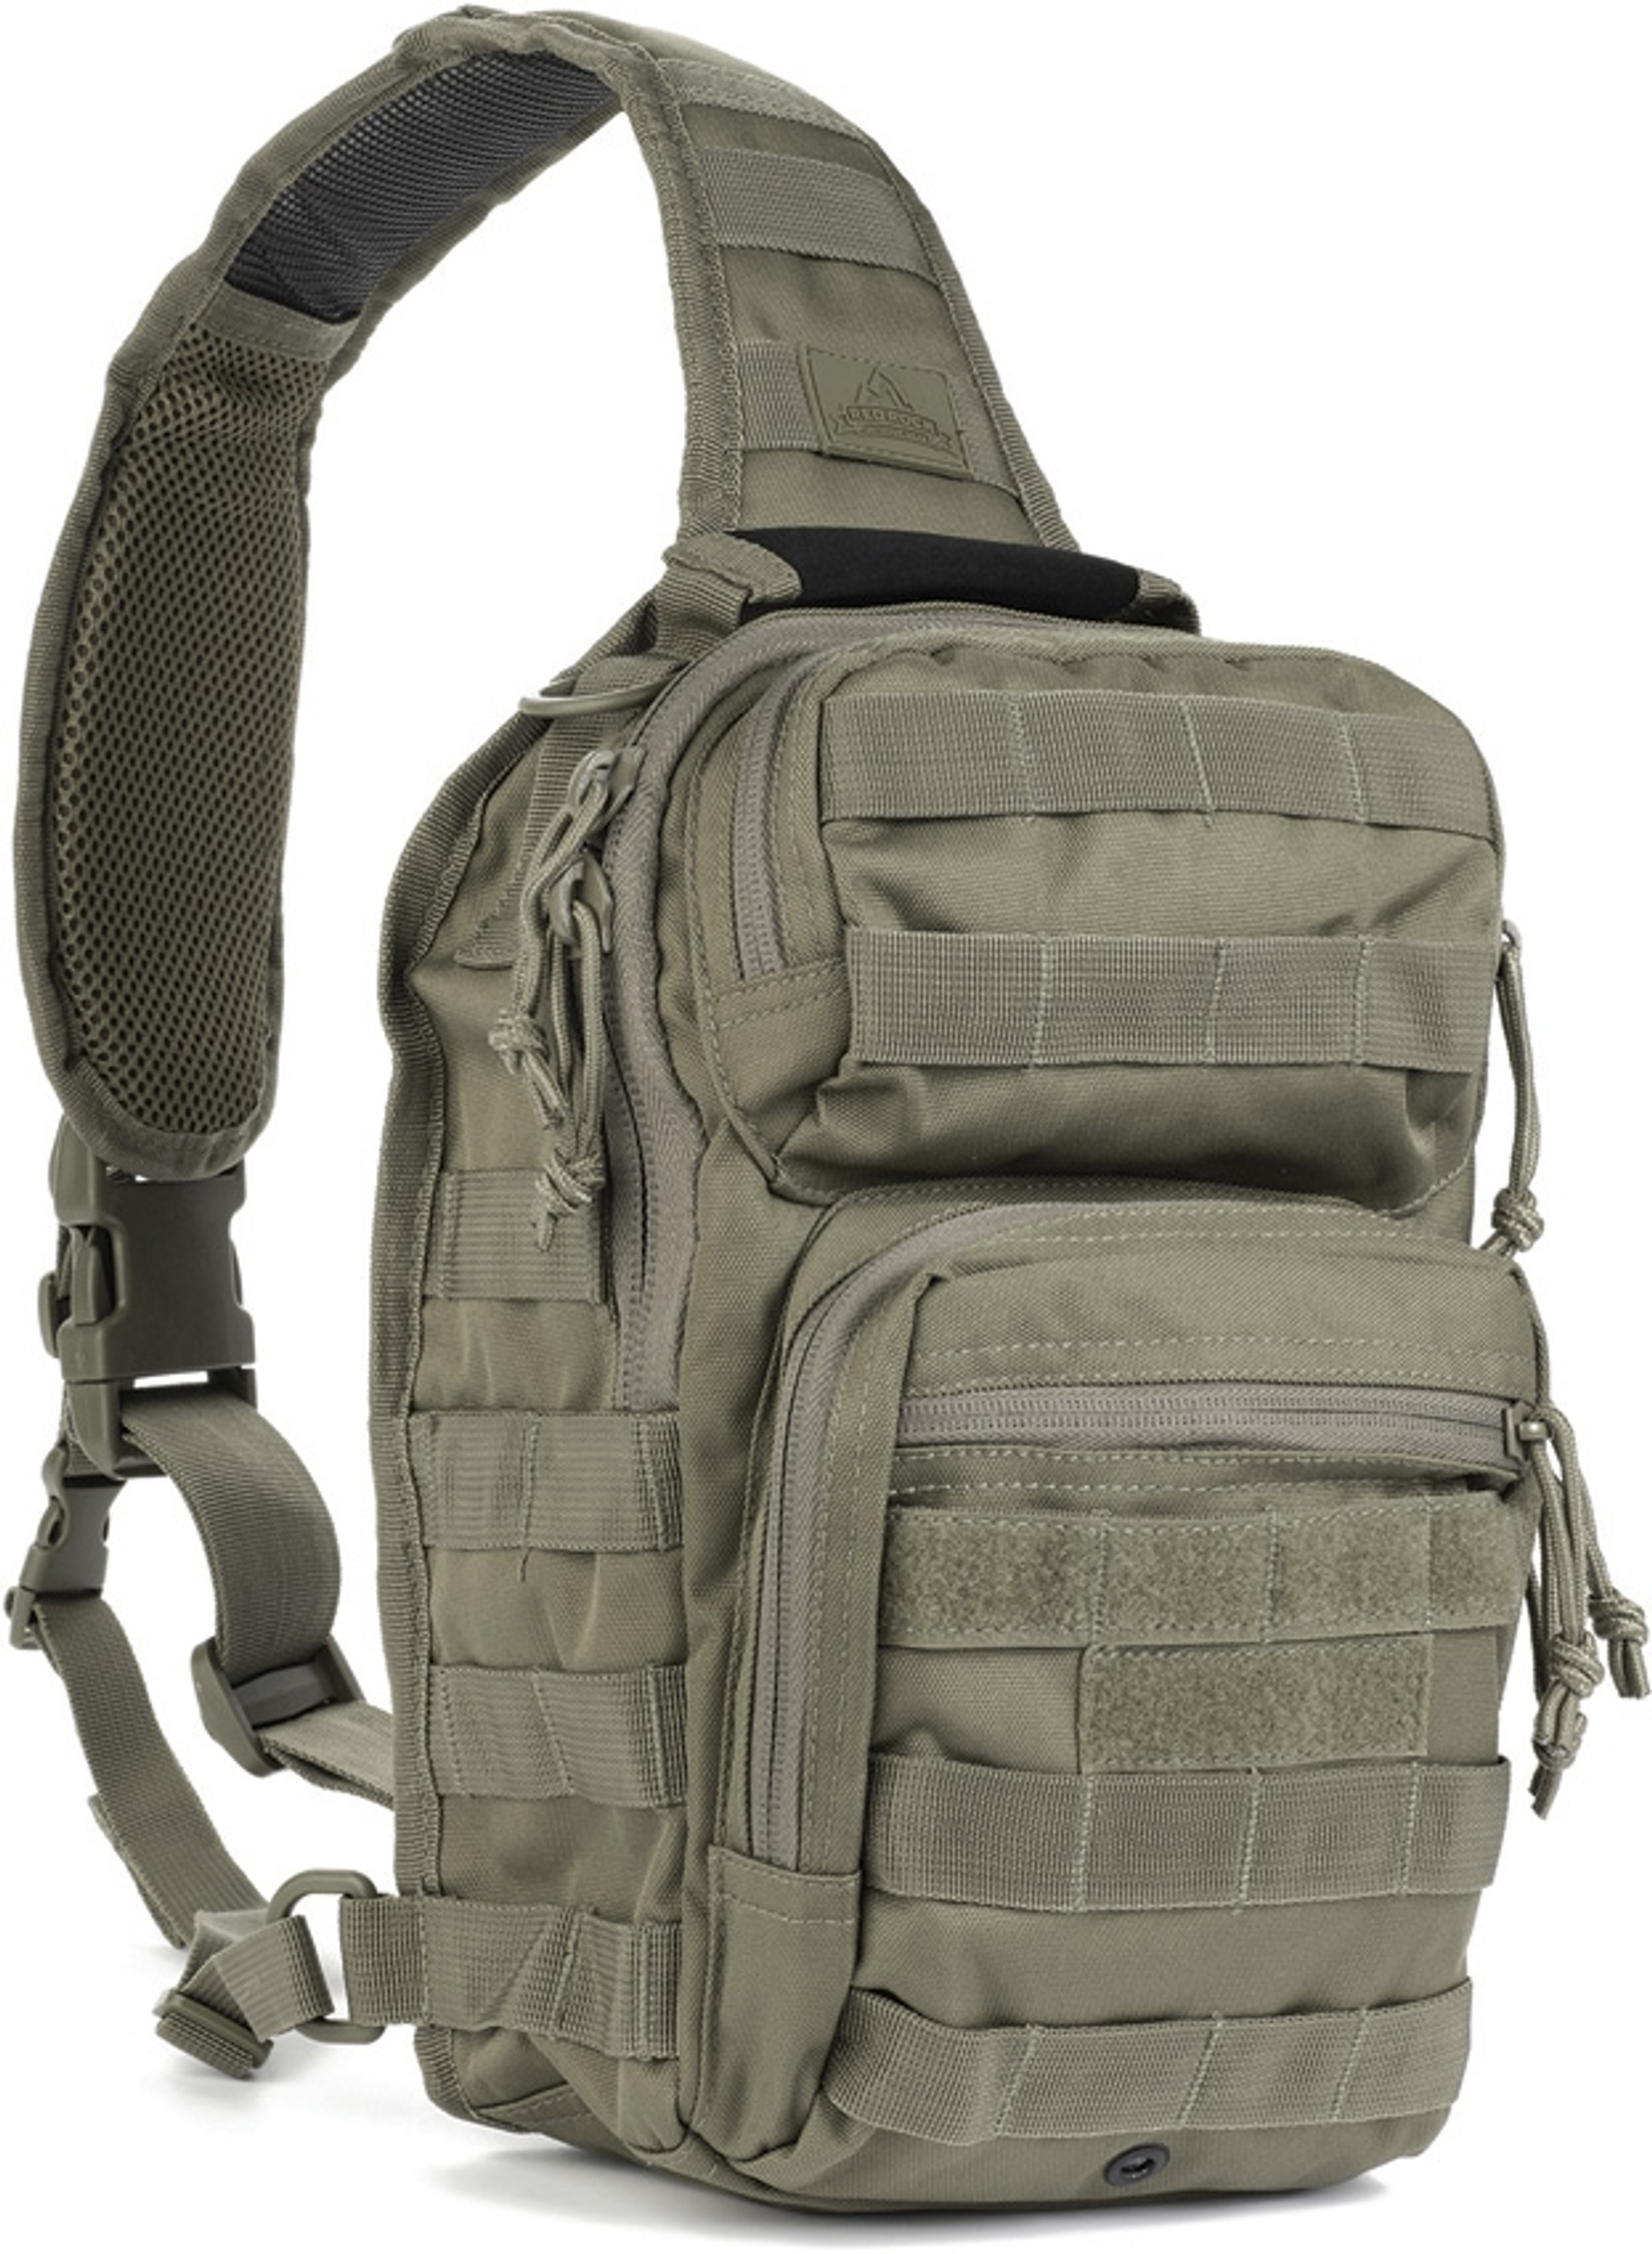 Rover Sling Pack Olive Drab